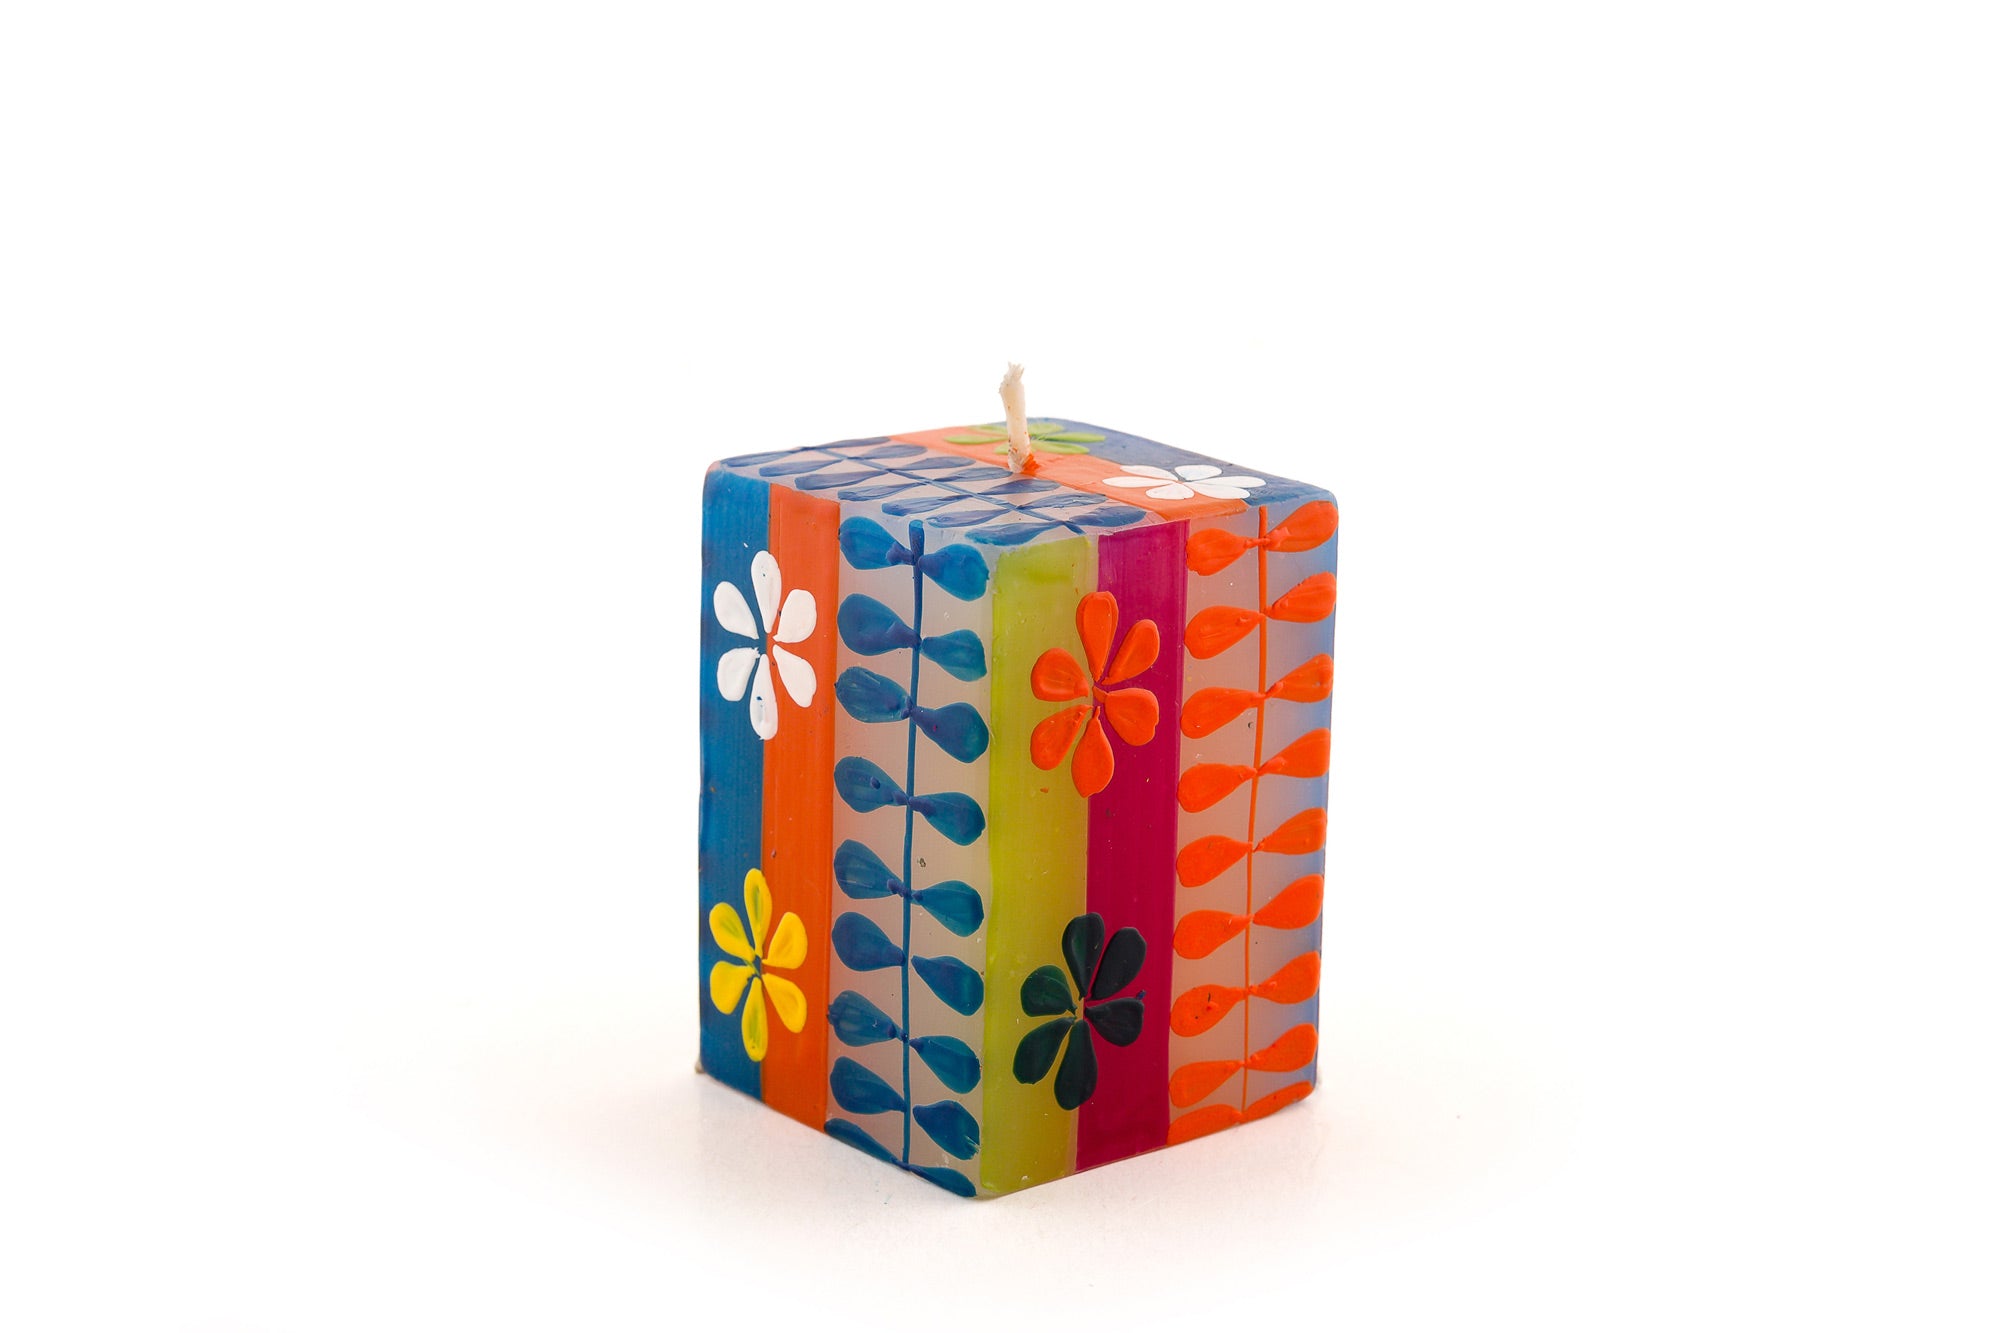 2x2x3 Summer cube candle. Flowers, dots and petal chain designs in summer colors.